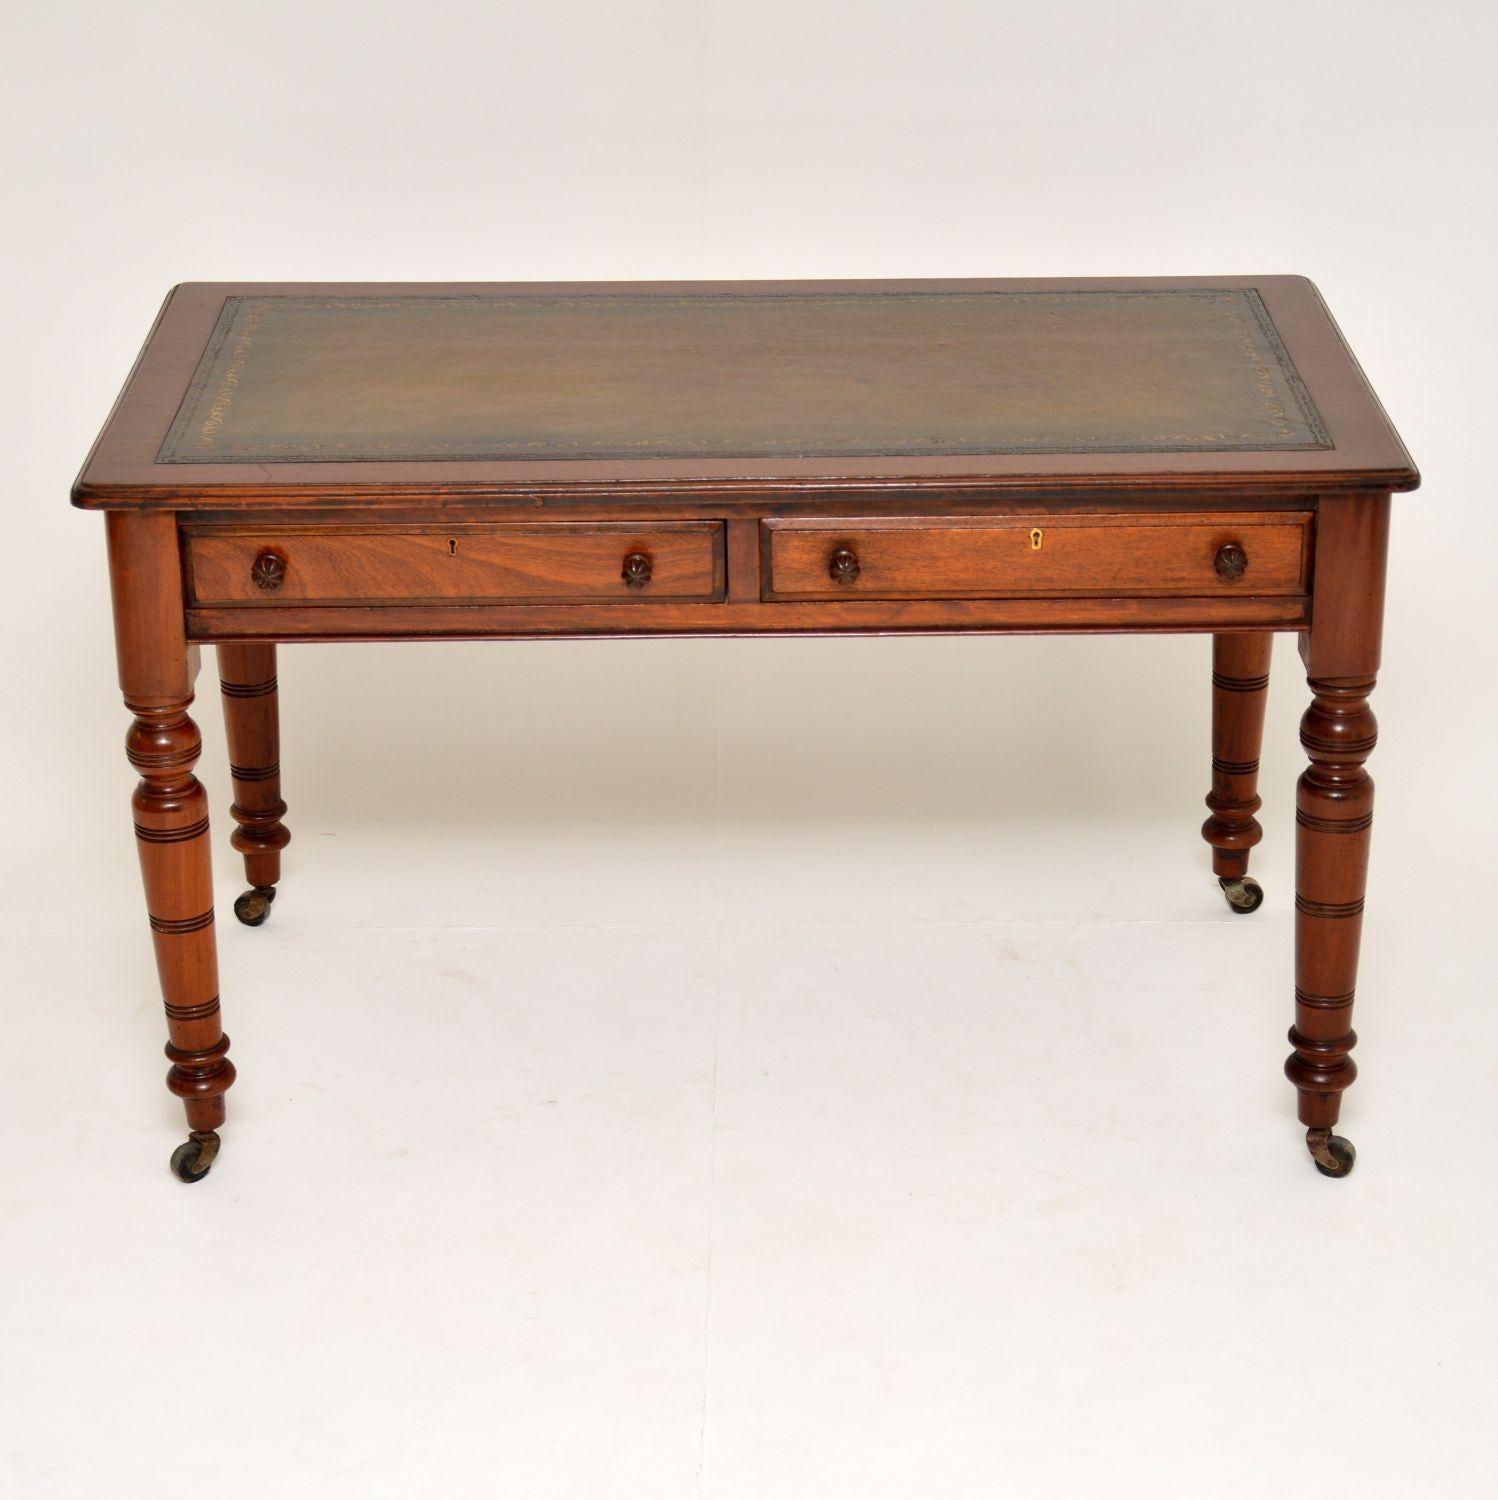 This antique mahogany writing table is a very strong looking piece of furniture & very well made too. It’s in excellent condition & dates from circa 1880s period. The tooled leather writing surface is a warm greenish, brown color & has lots of